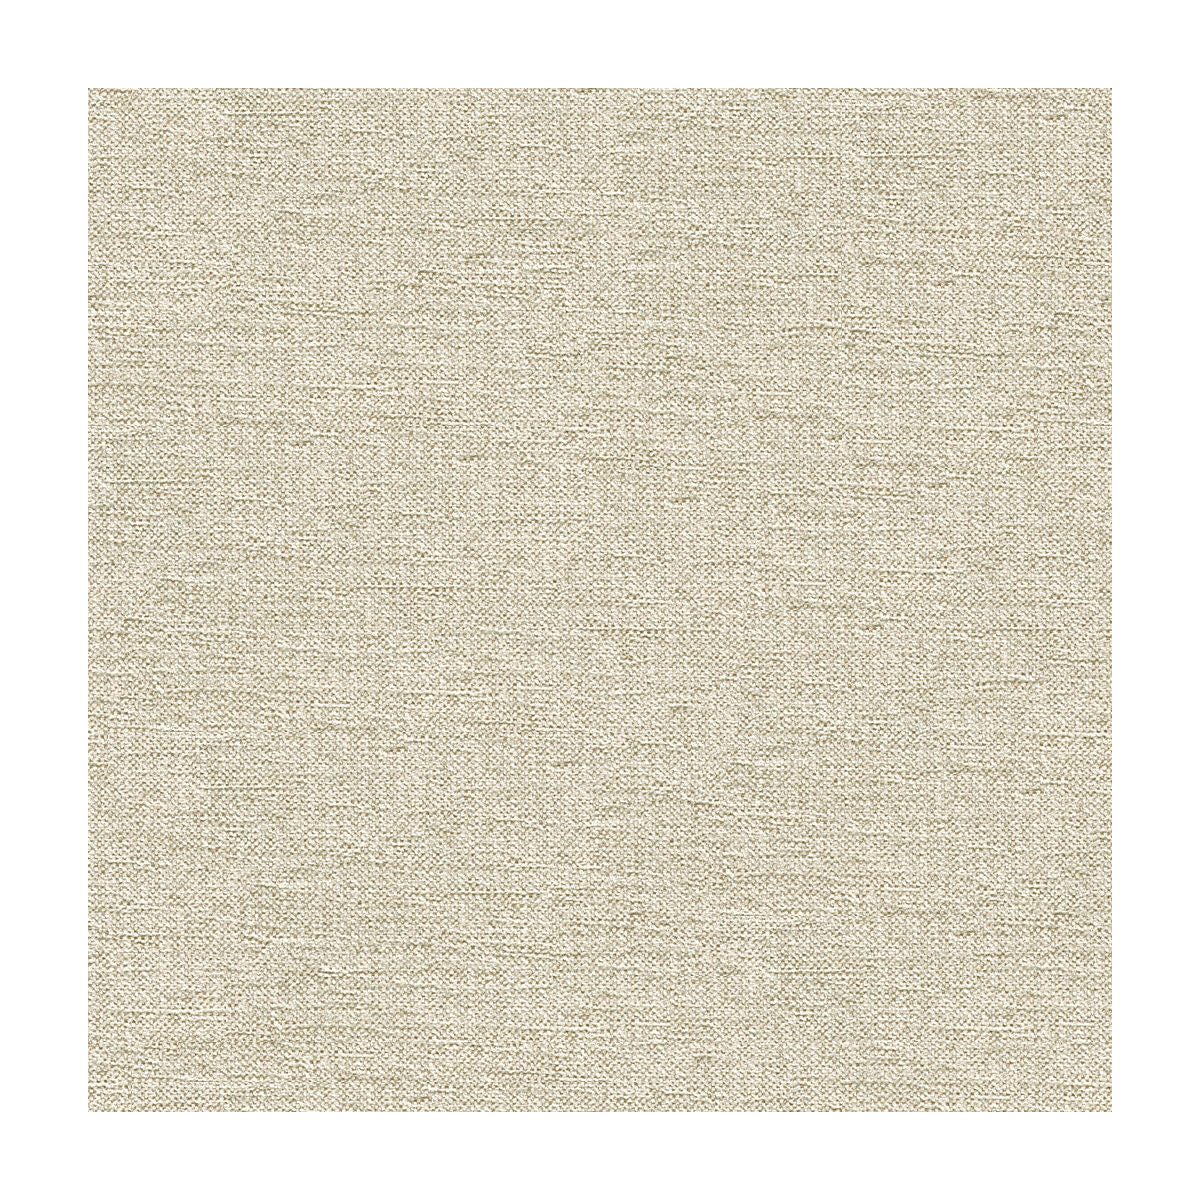 Kravet Smart fabric in 33831-1601 color - pattern 33831.1601.0 - by Kravet Smart in the Performance Crypton Home collection